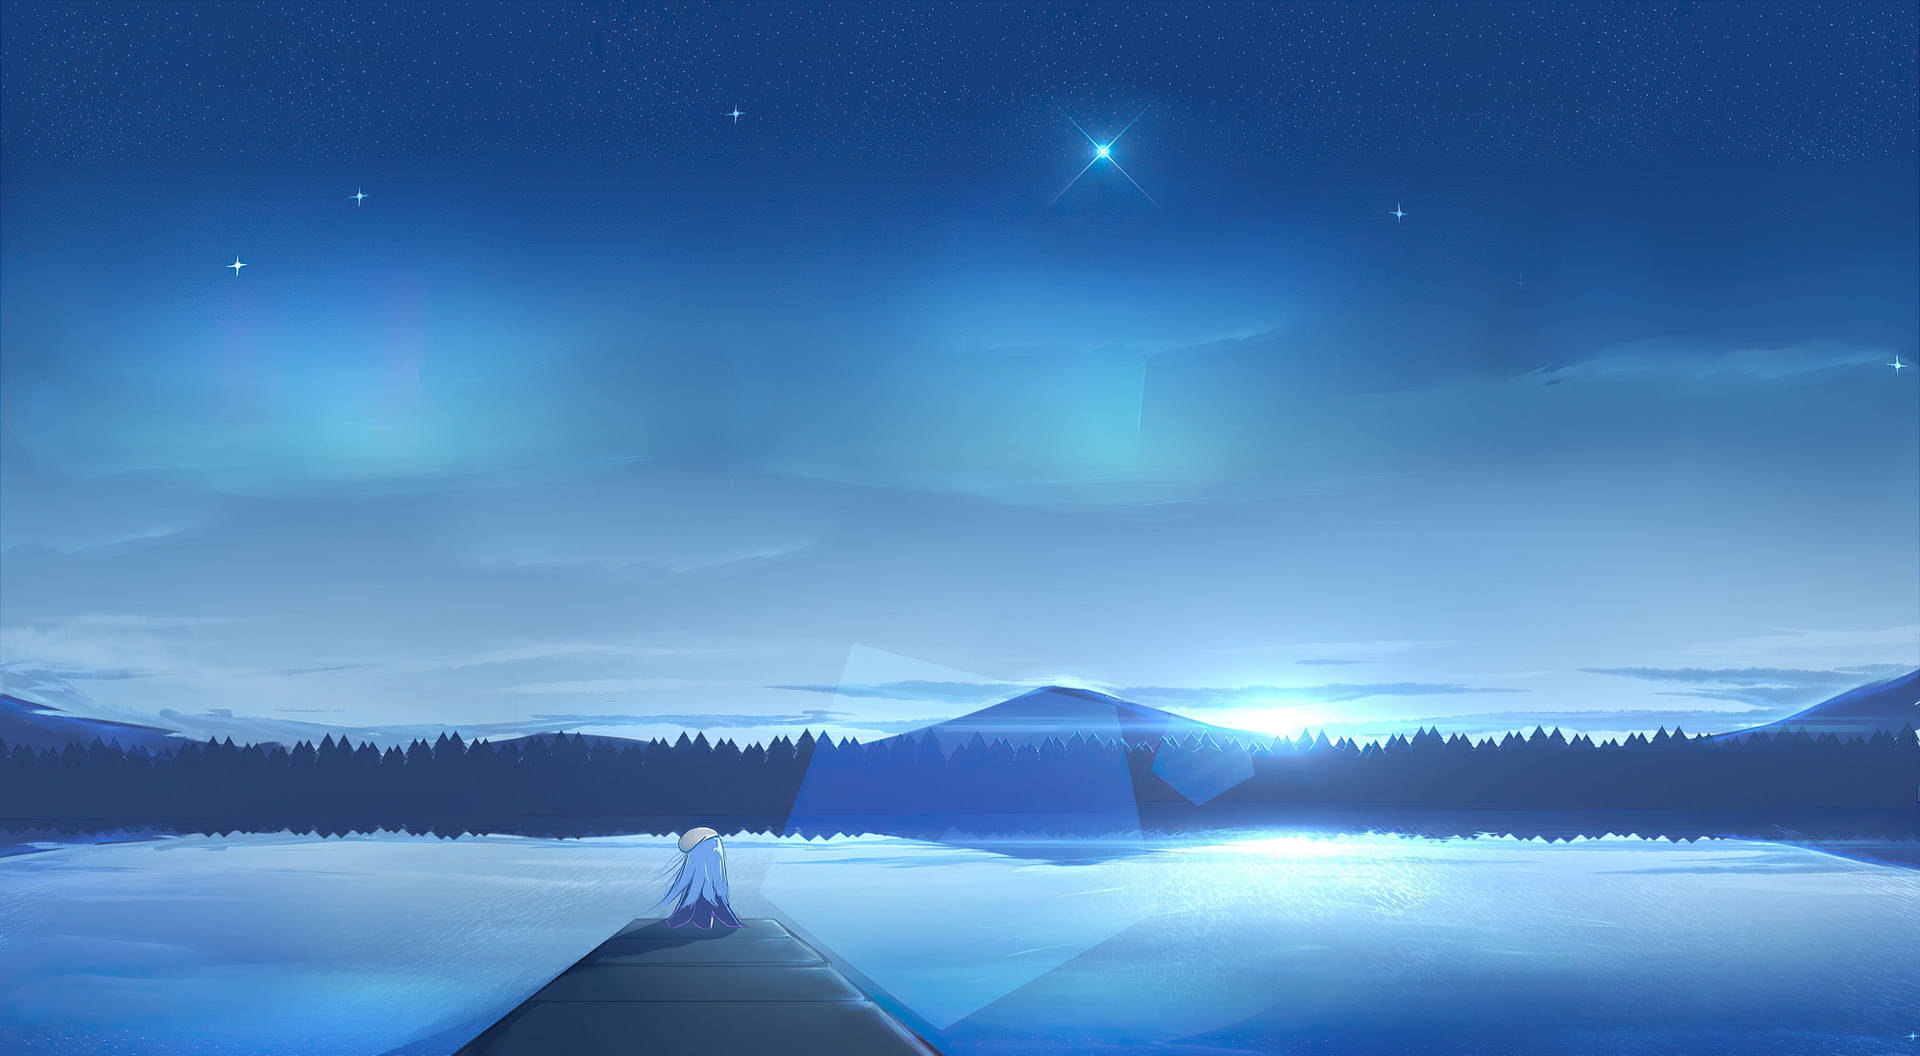 Animation Anime Girl At Pier With Lake And Mountains Background